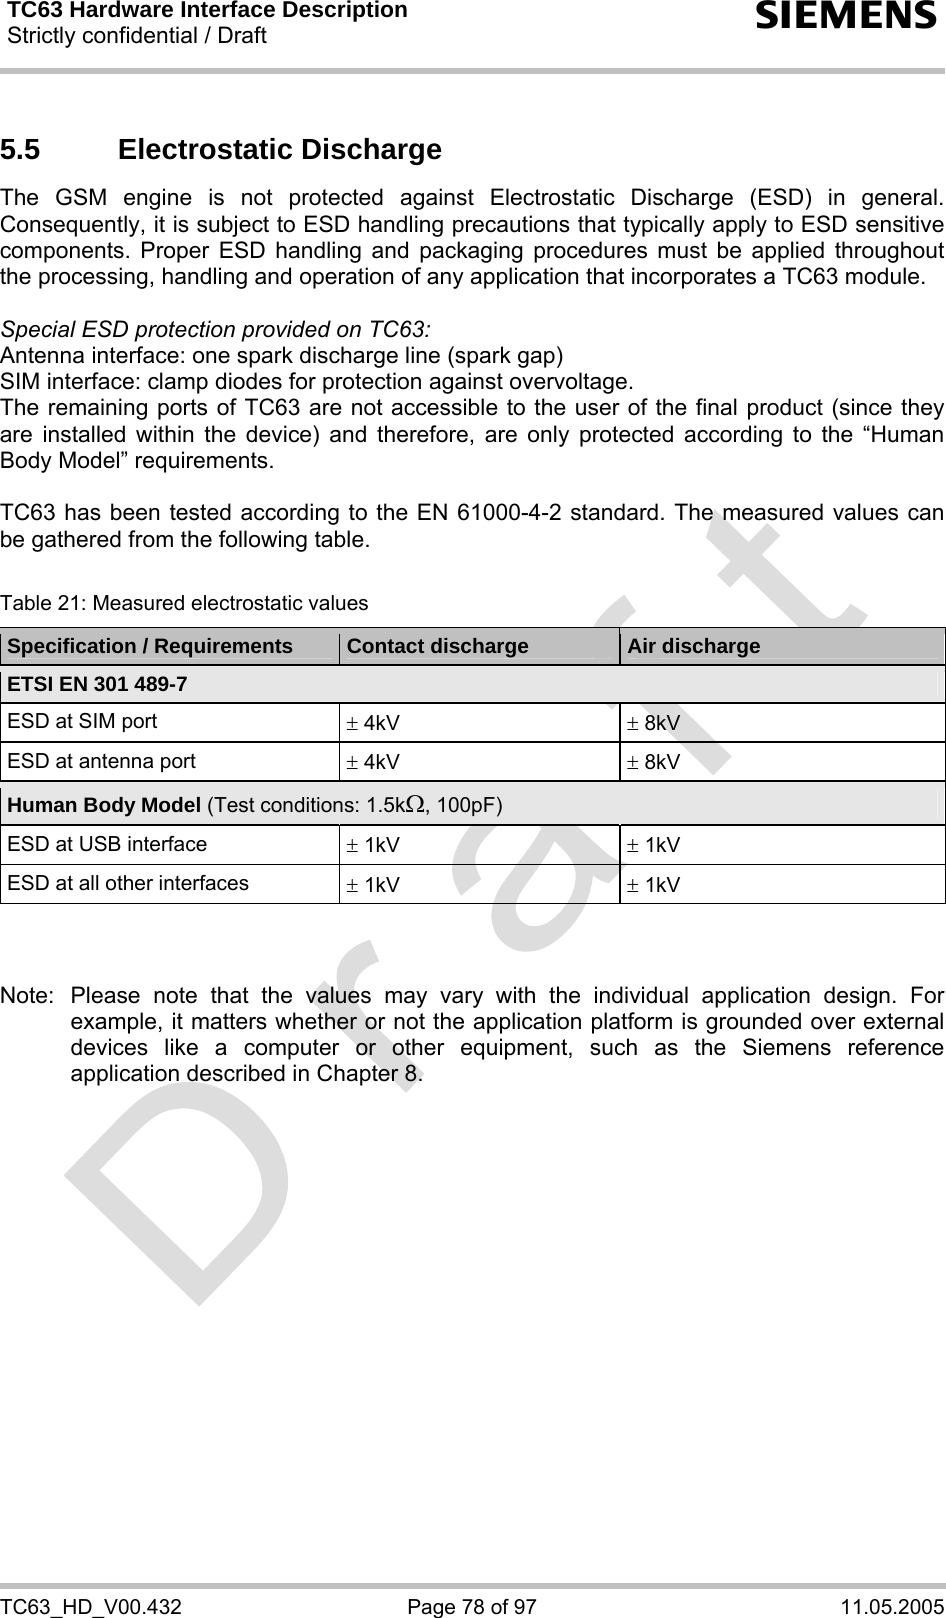 TC63 Hardware Interface Description Strictly confidential / Draft  s TC63_HD_V00.432  Page 78 of 97  11.05.2005 5.5 Electrostatic Discharge The GSM engine is not protected against Electrostatic Discharge (ESD) in general. Consequently, it is subject to ESD handling precautions that typically apply to ESD sensitive components. Proper ESD handling and packaging procedures must be applied throughout the processing, handling and operation of any application that incorporates a TC63 module.  Special ESD protection provided on TC63: Antenna interface: one spark discharge line (spark gap) SIM interface: clamp diodes for protection against overvoltage.  The remaining ports of TC63 are not accessible to the user of the final product (since they are installed within the device) and therefore, are only protected according to the “Human Body Model” requirements.  TC63 has been tested according to the EN 61000-4-2 standard. The measured values can be gathered from the following table.  Table 21: Measured electrostatic values Specification / Requirements  Contact discharge  Air discharge ETSI EN 301 489-7 ESD at SIM port  ± 4kV  ± 8kV ESD at antenna port  ± 4kV  ± 8kV Human Body Model (Test conditions: 1.5kΩ, 100pF) ESD at USB interface  ± 1kV  ± 1kV ESD at all other interfaces  ± 1kV  ± 1kV    Note:  Please note that the values may vary with the individual application design. For example, it matters whether or not the application platform is grounded over external devices like a computer or other equipment, such as the Siemens reference application described in Chapter 8.  